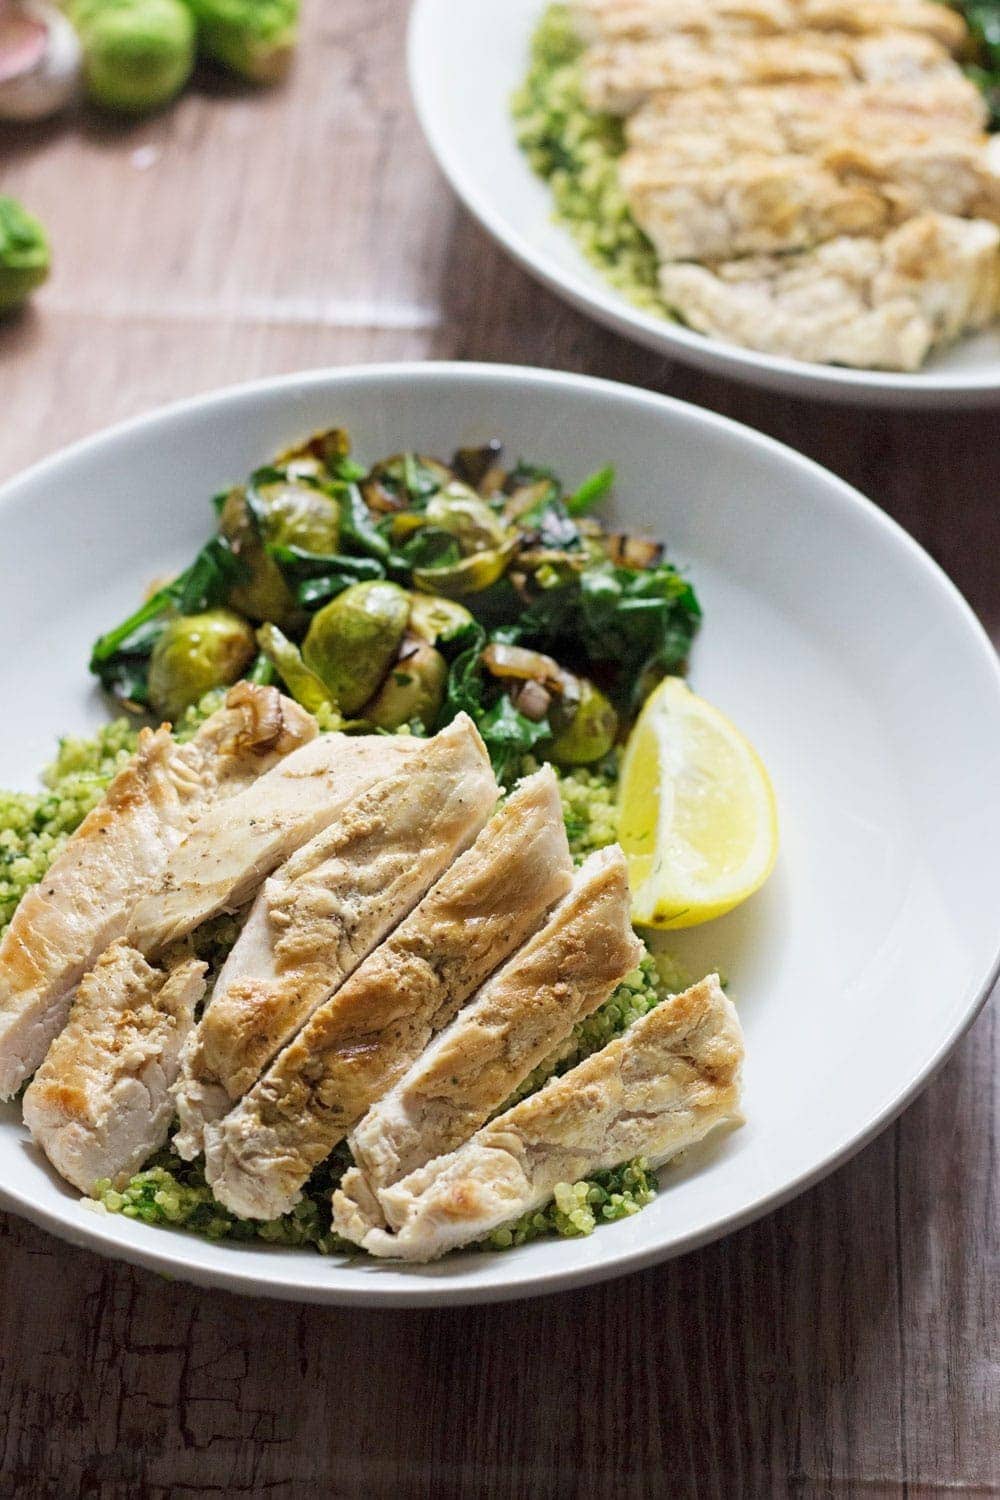 Looking for a delicious and healthy weeknight dinner? These healthy green quinoa bowls topped with chicken are the perfect thing!